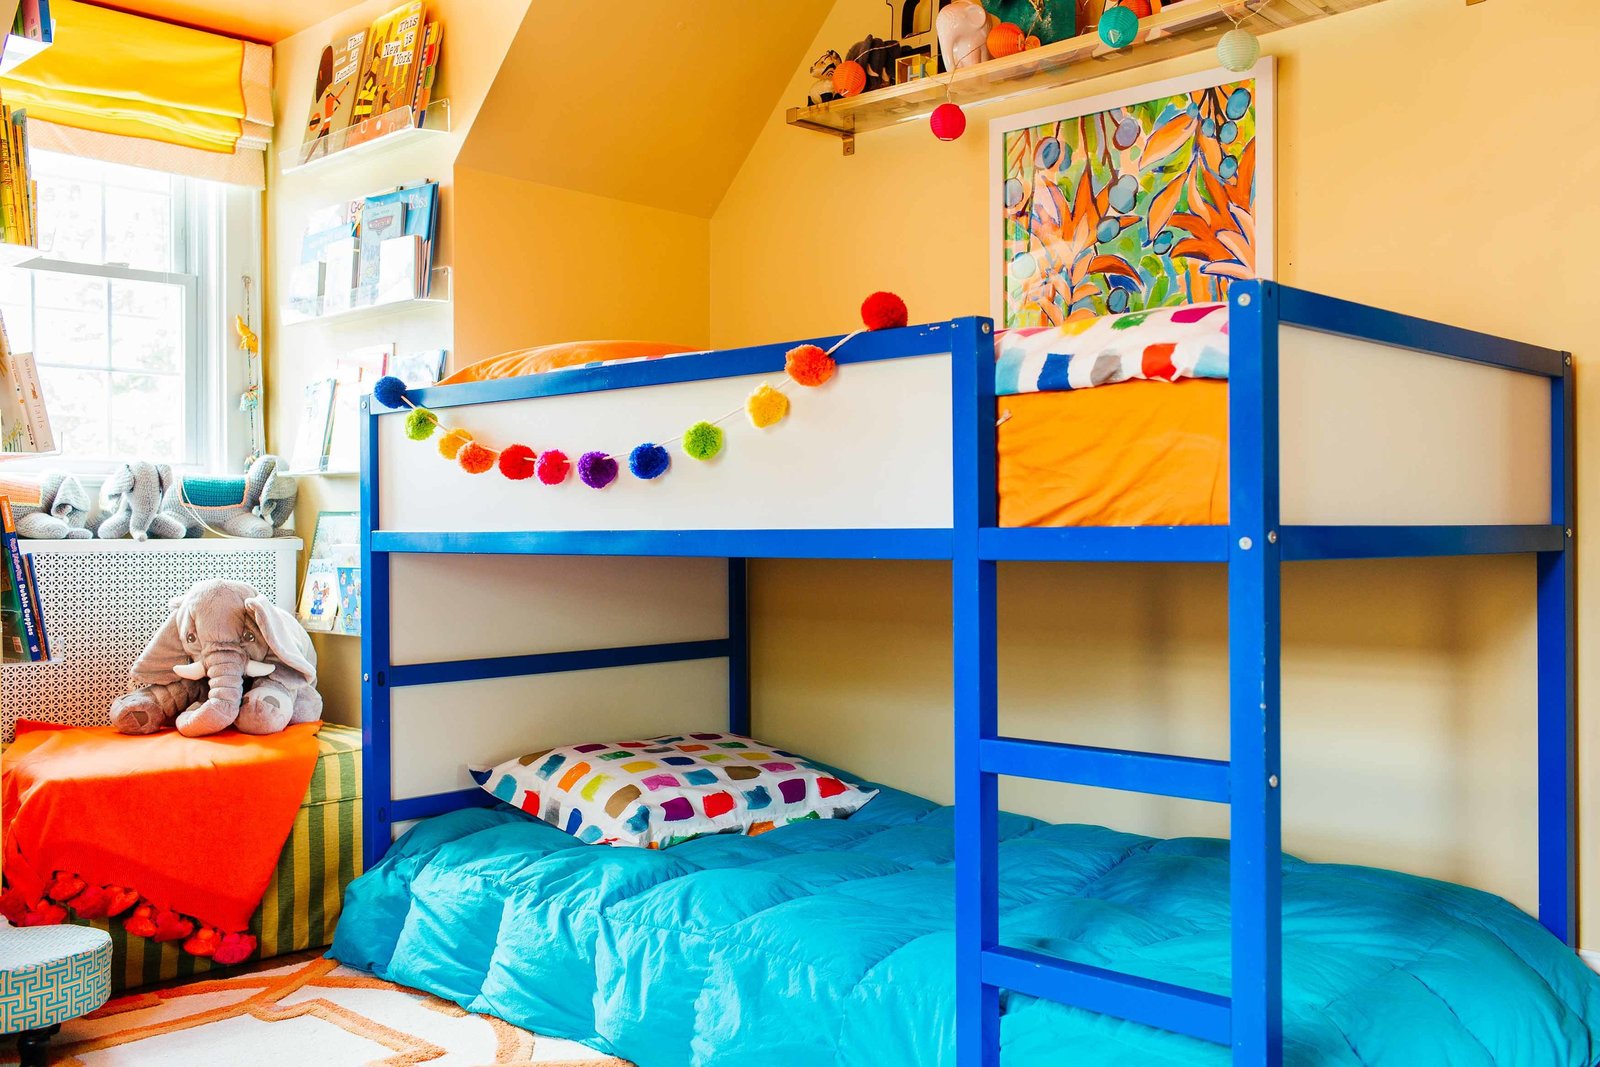 A boys bedroom with blue bunk beds and pom pom garland.